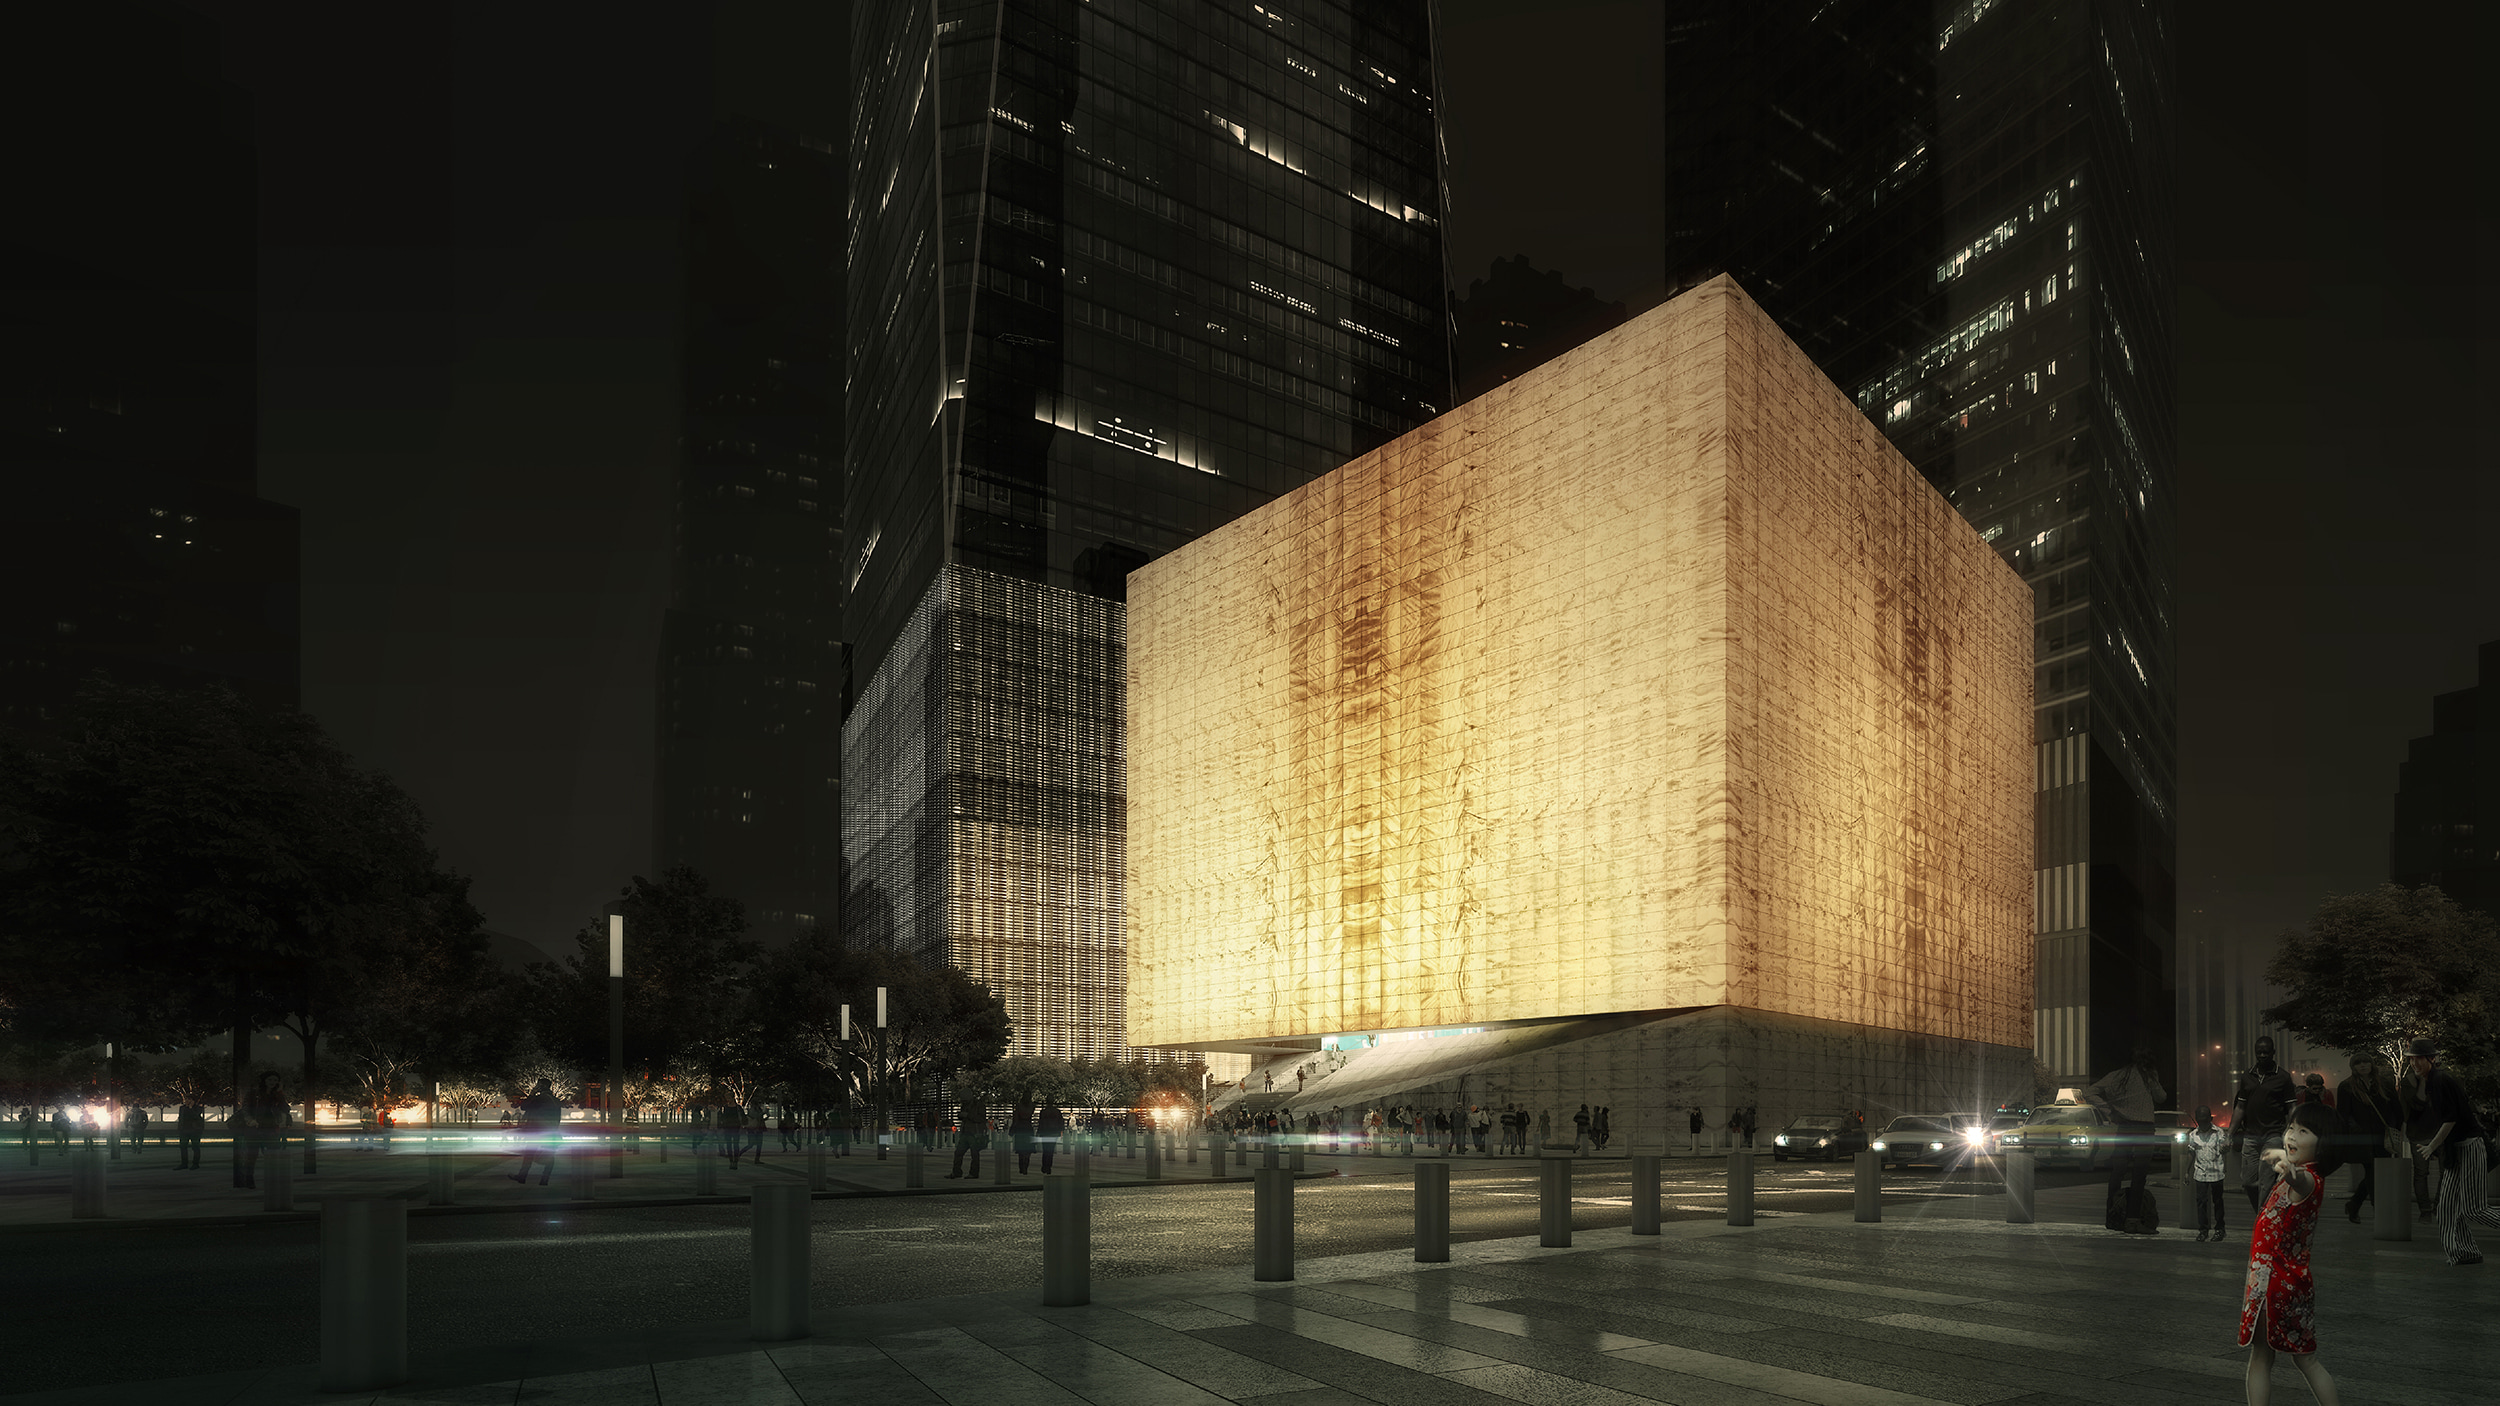 A nighttime visualization of The Perelman Performing Arts Center at the World Trade Center.